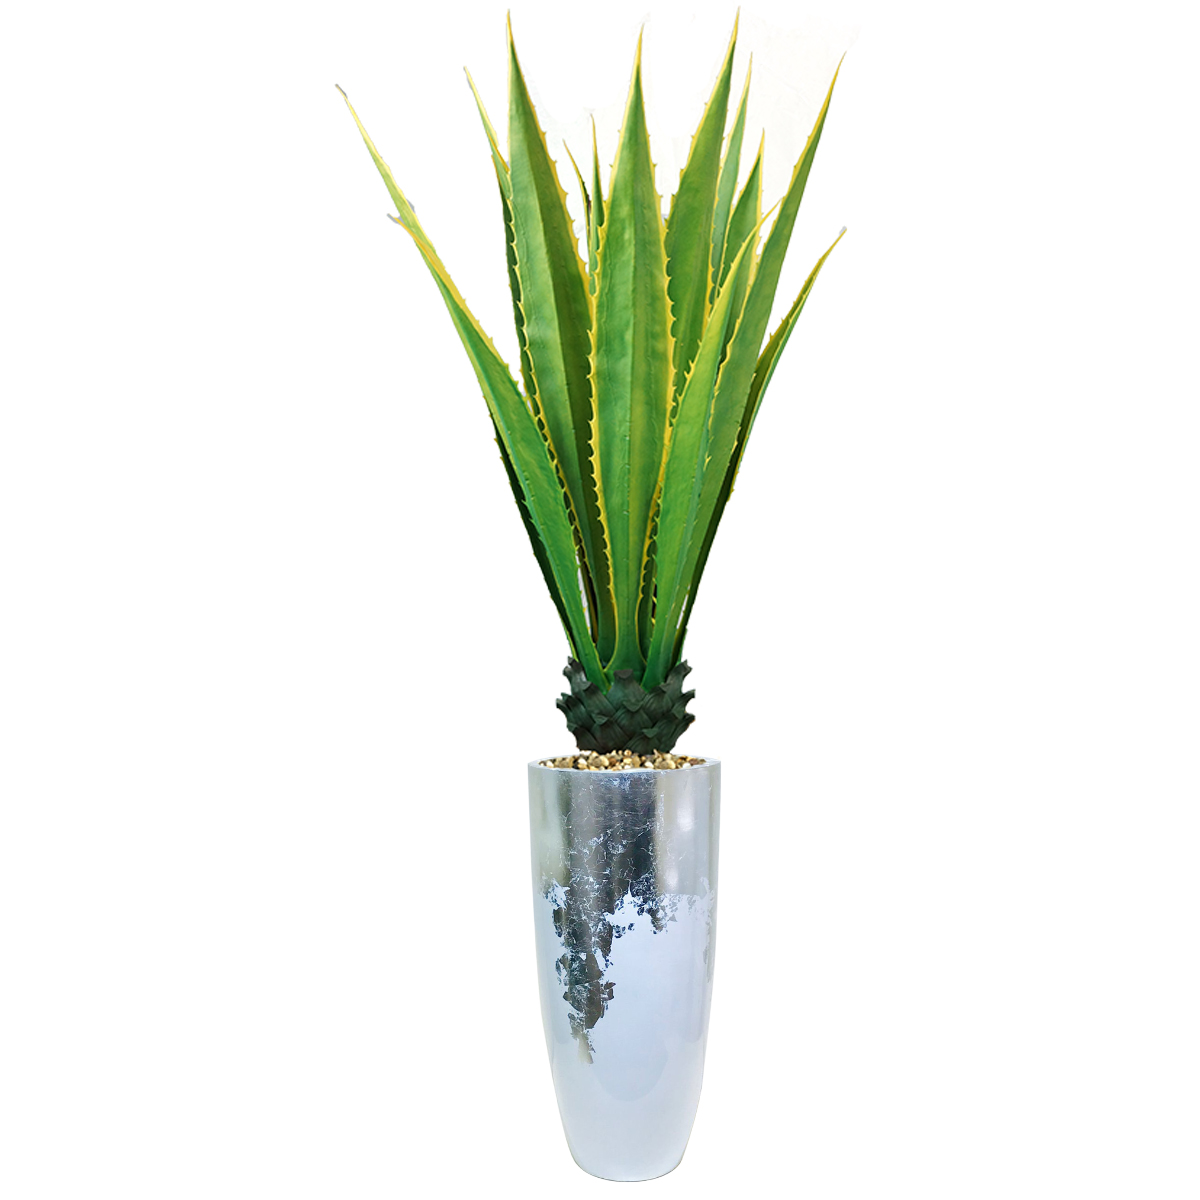 Vhx147220 69.5 In. Indoor & Outdoor Agave Plant In Silver Resin Planter